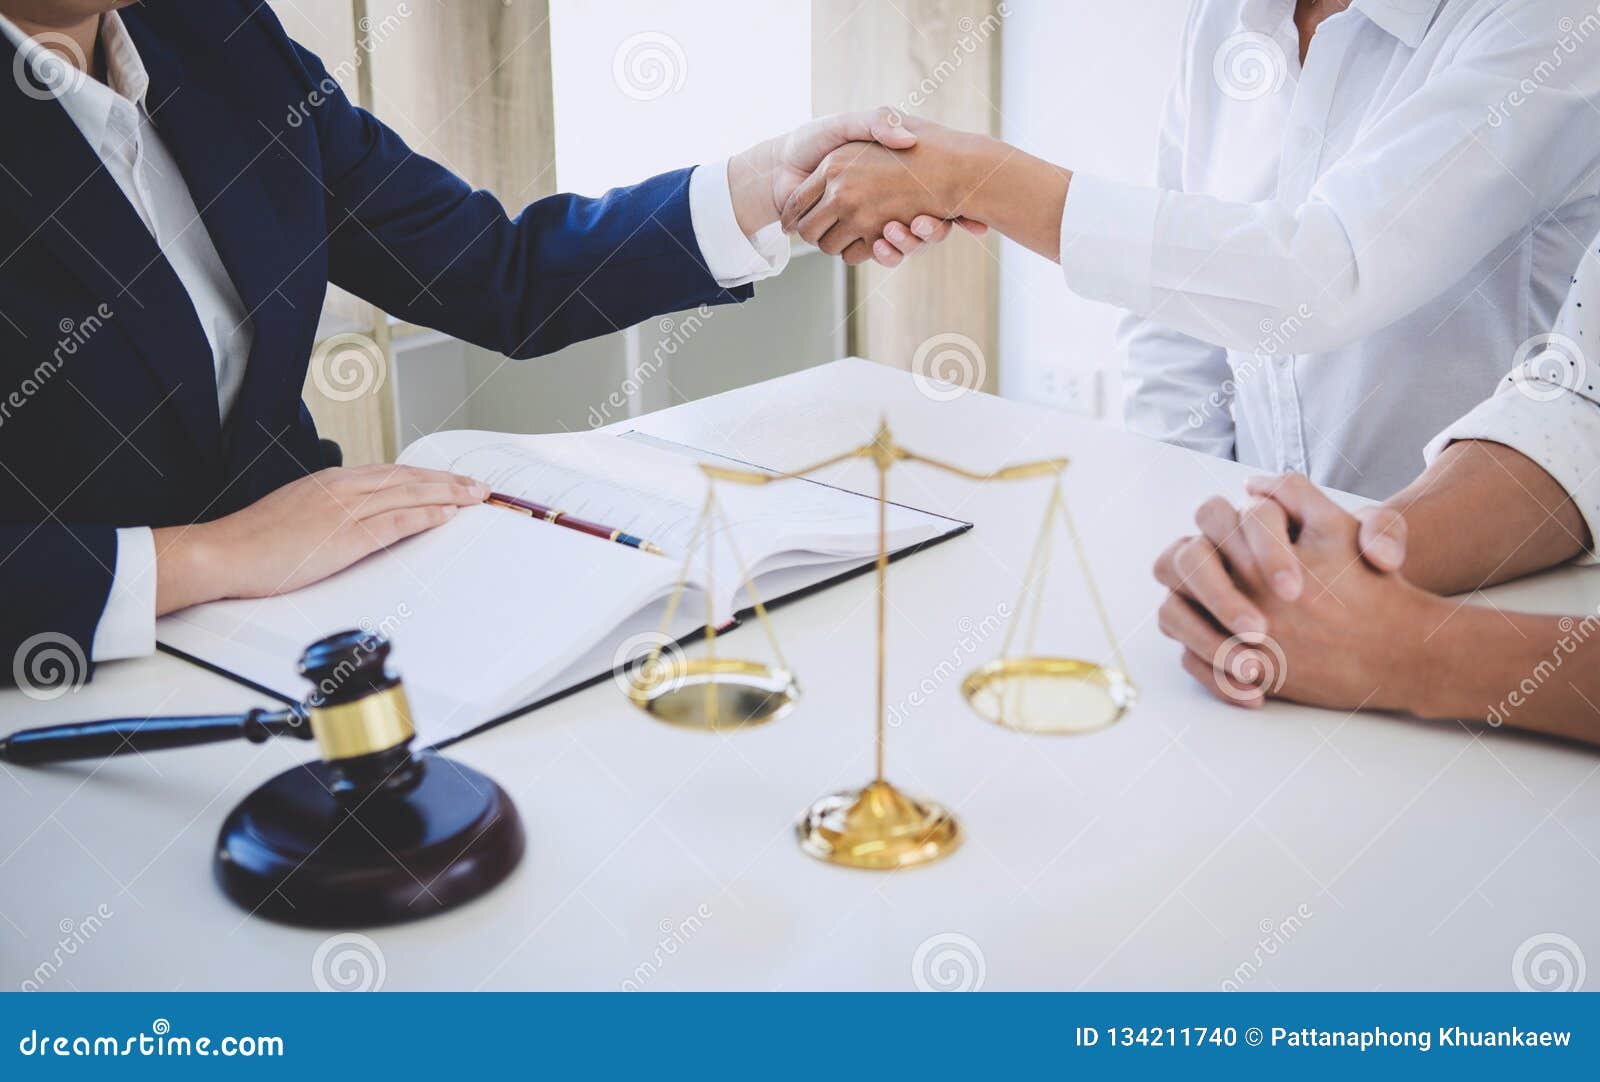 handshake after good cooperation greeting, having meeting with team at law firm, consultation between a female lawyer and